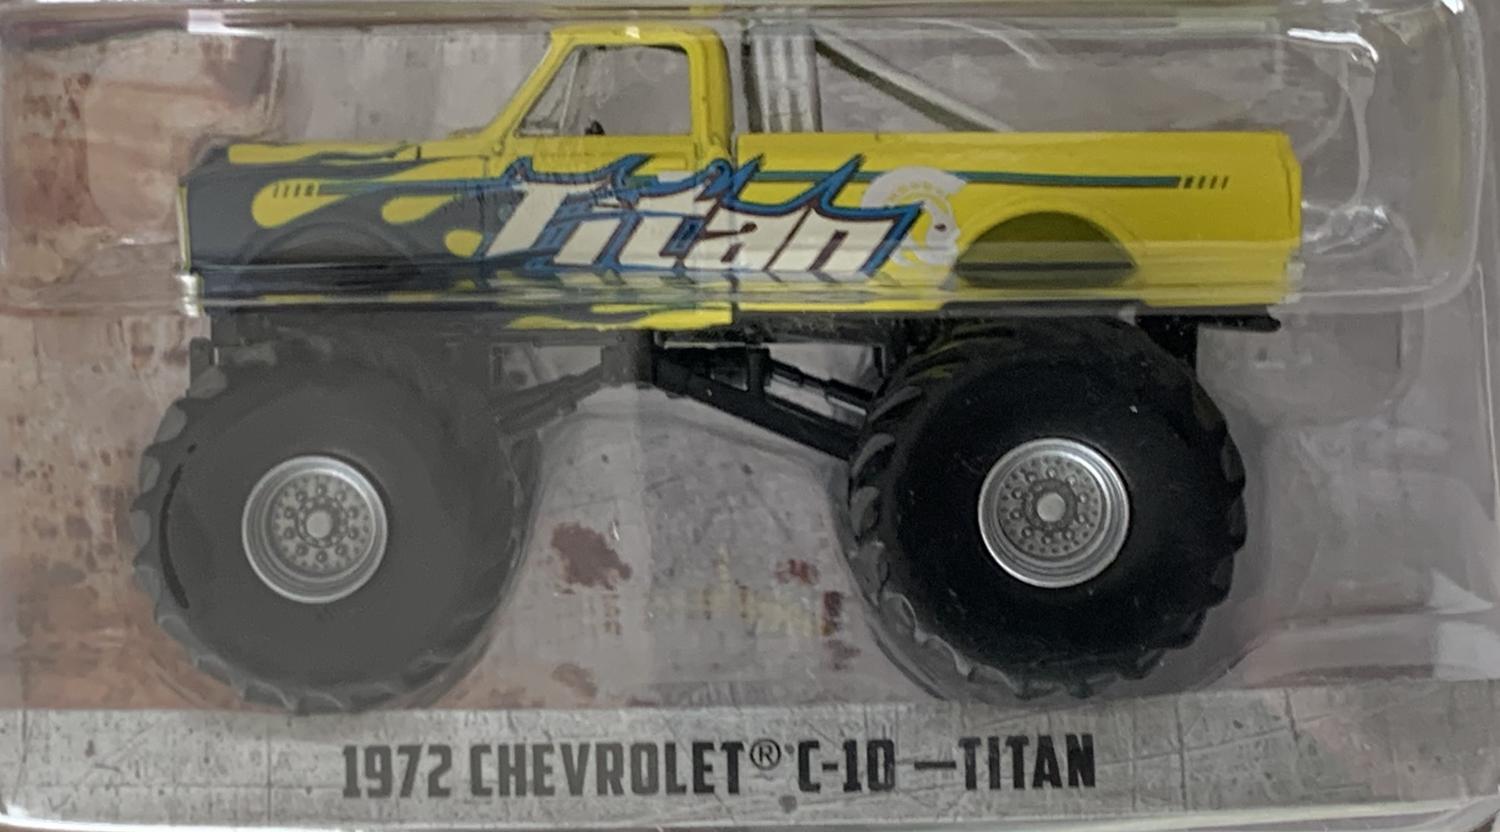 Kings of Crunch Monster Truck series 11, 1972 Chevrolet C10 Titan, 1:64 scale diecast model from Greenlight, limited edition model